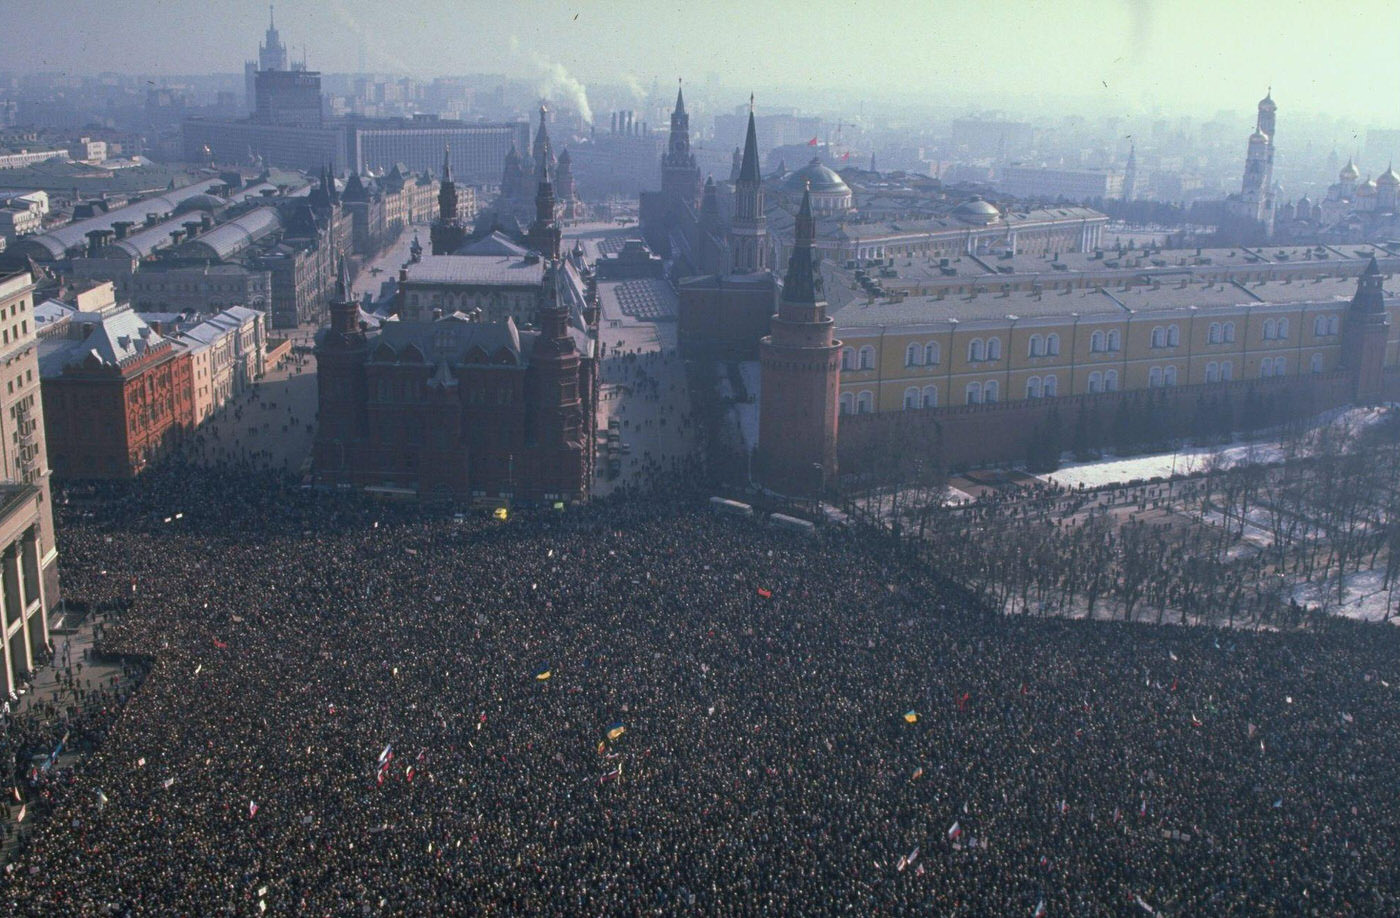 Sea of pro-democracy protestors fill Red Square by Kremlin demonstrating for reform.